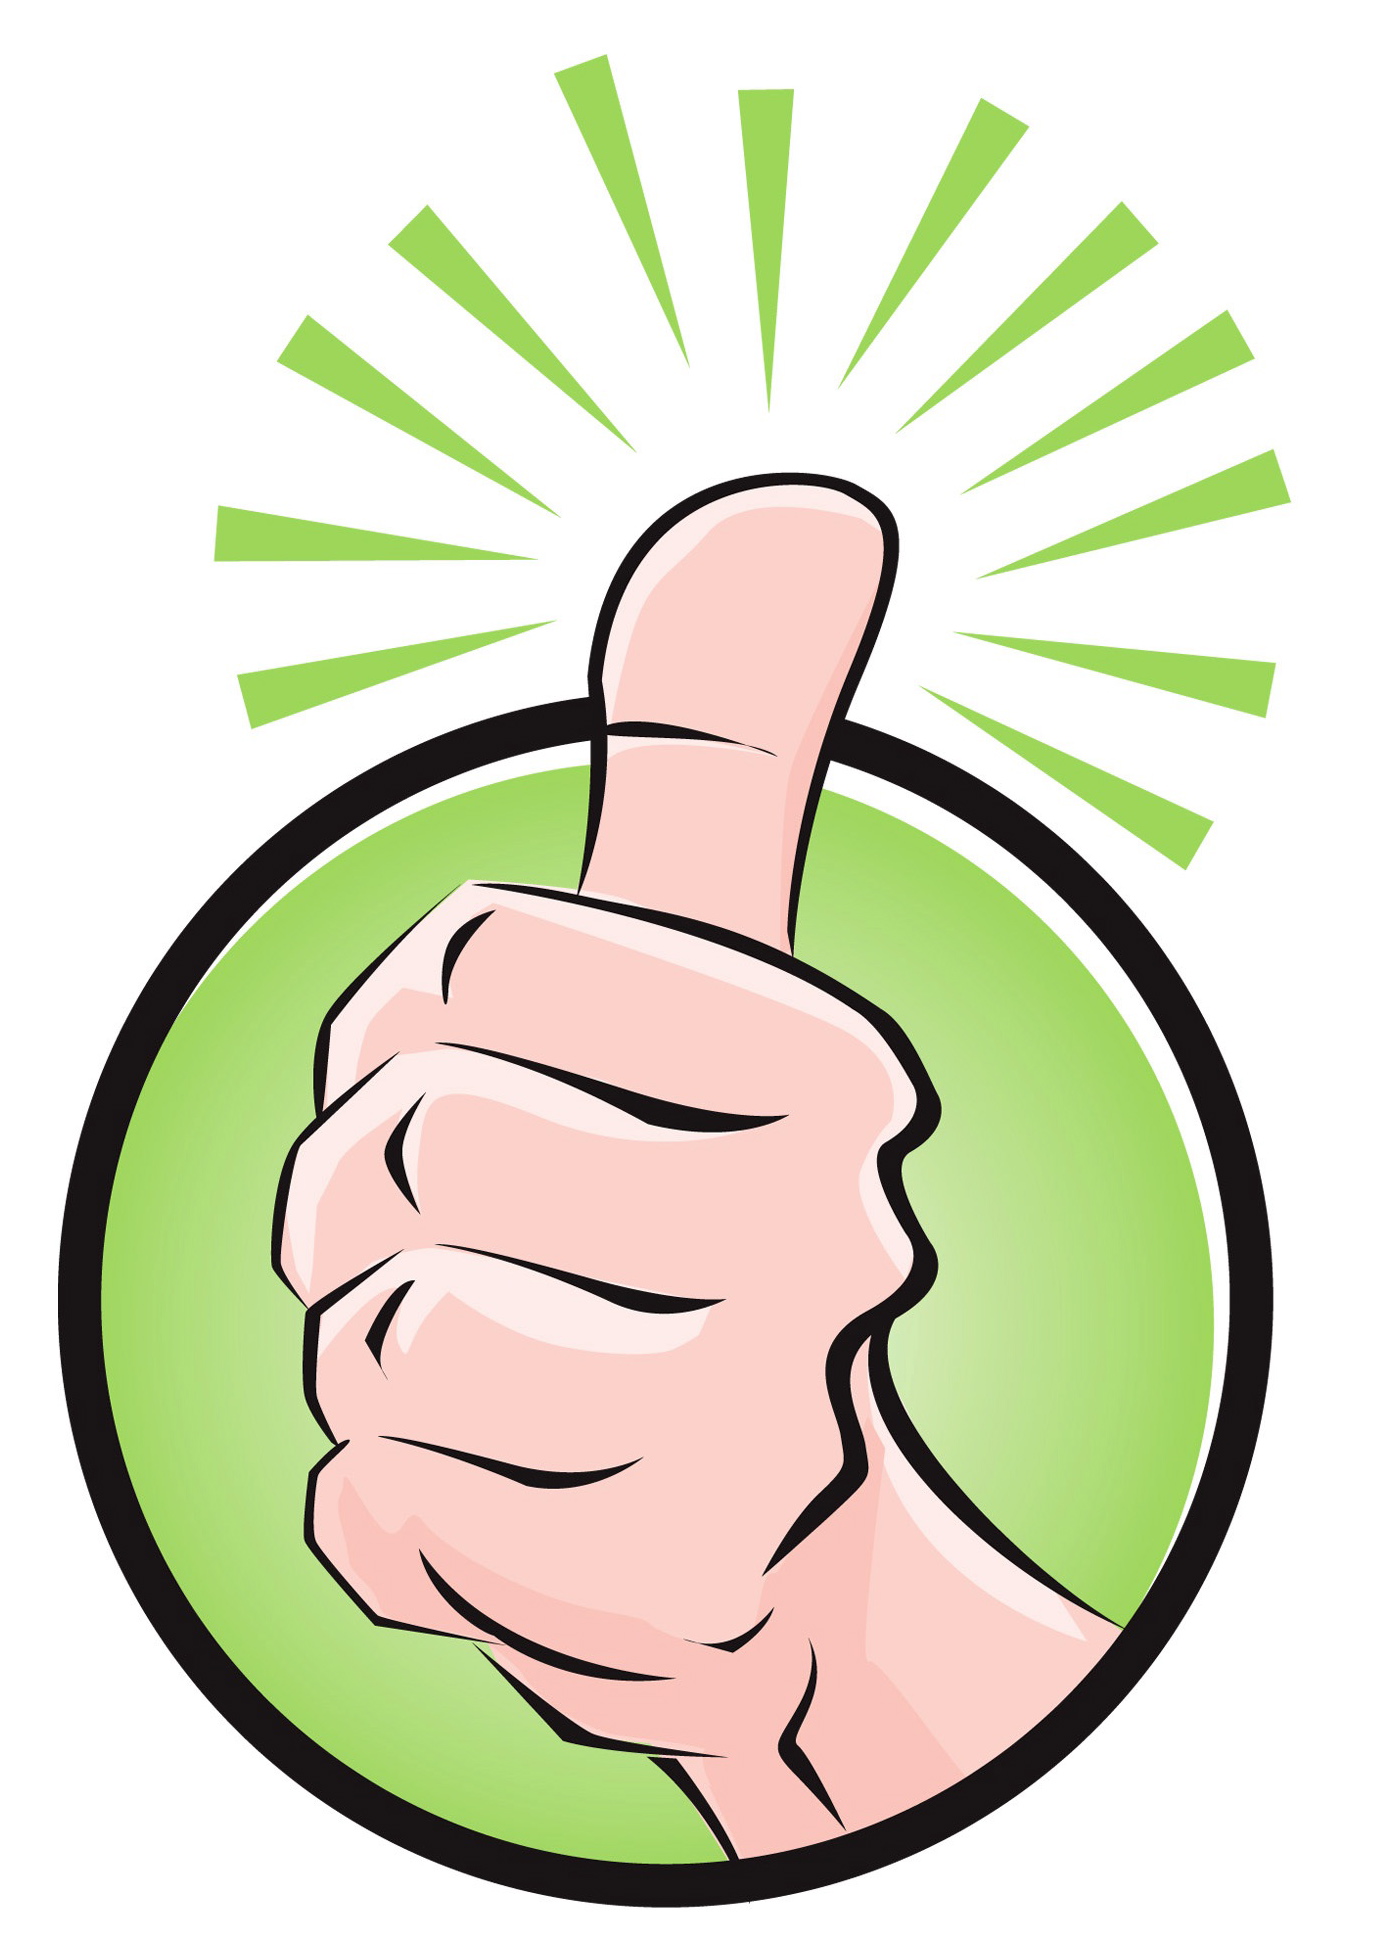 thumbs up clipart free download - photo #31